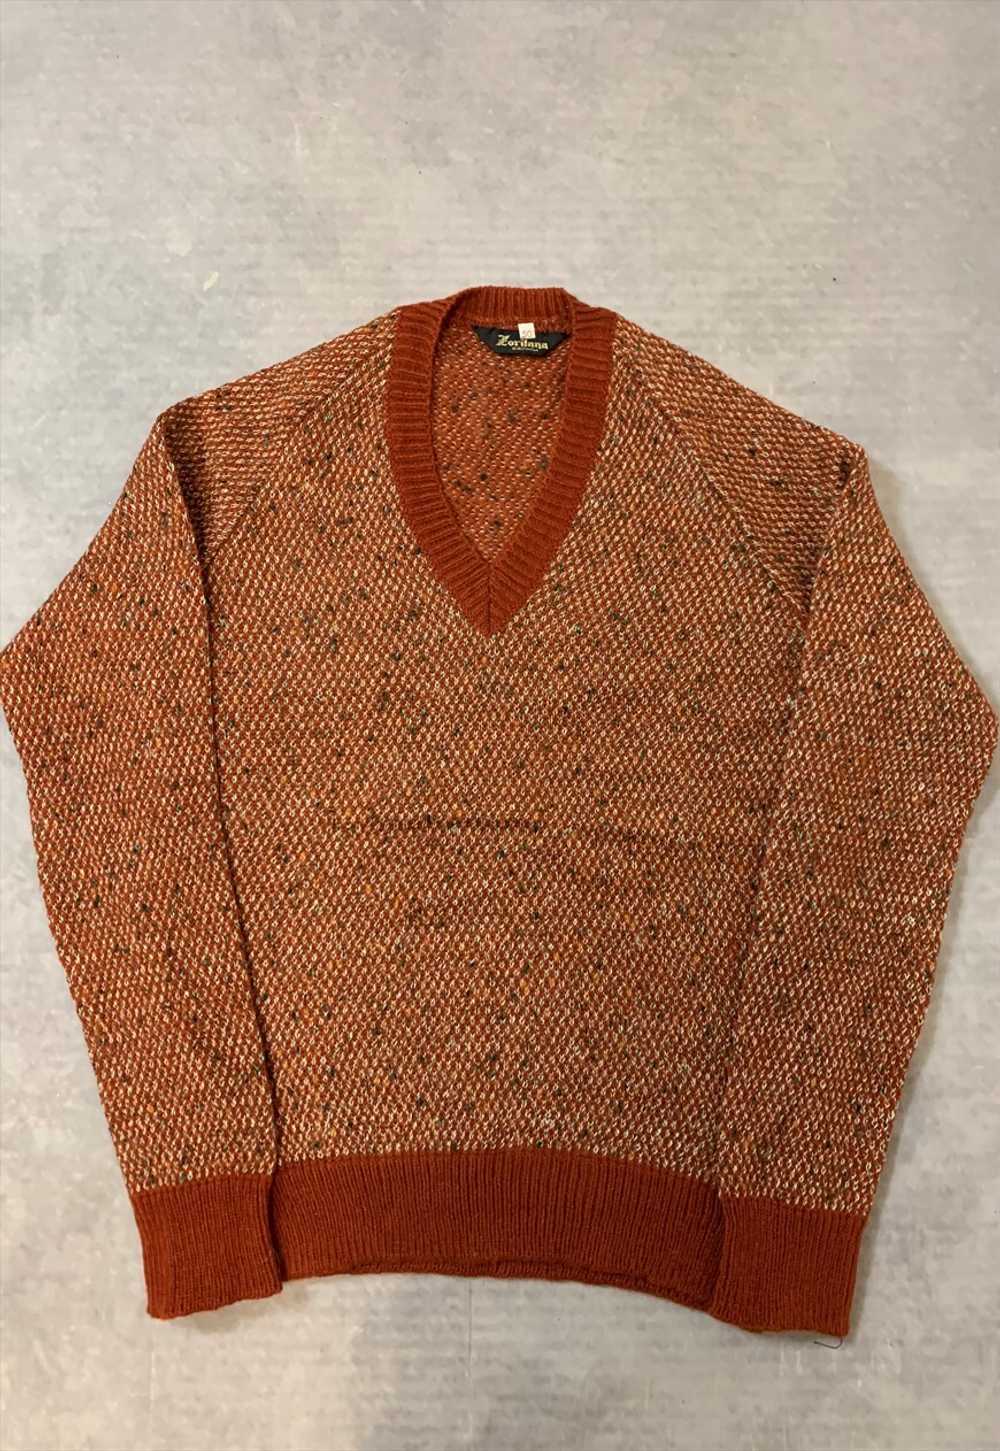 Vintage Knitted Jumper Abstract Patterned Knit Sw… - image 2